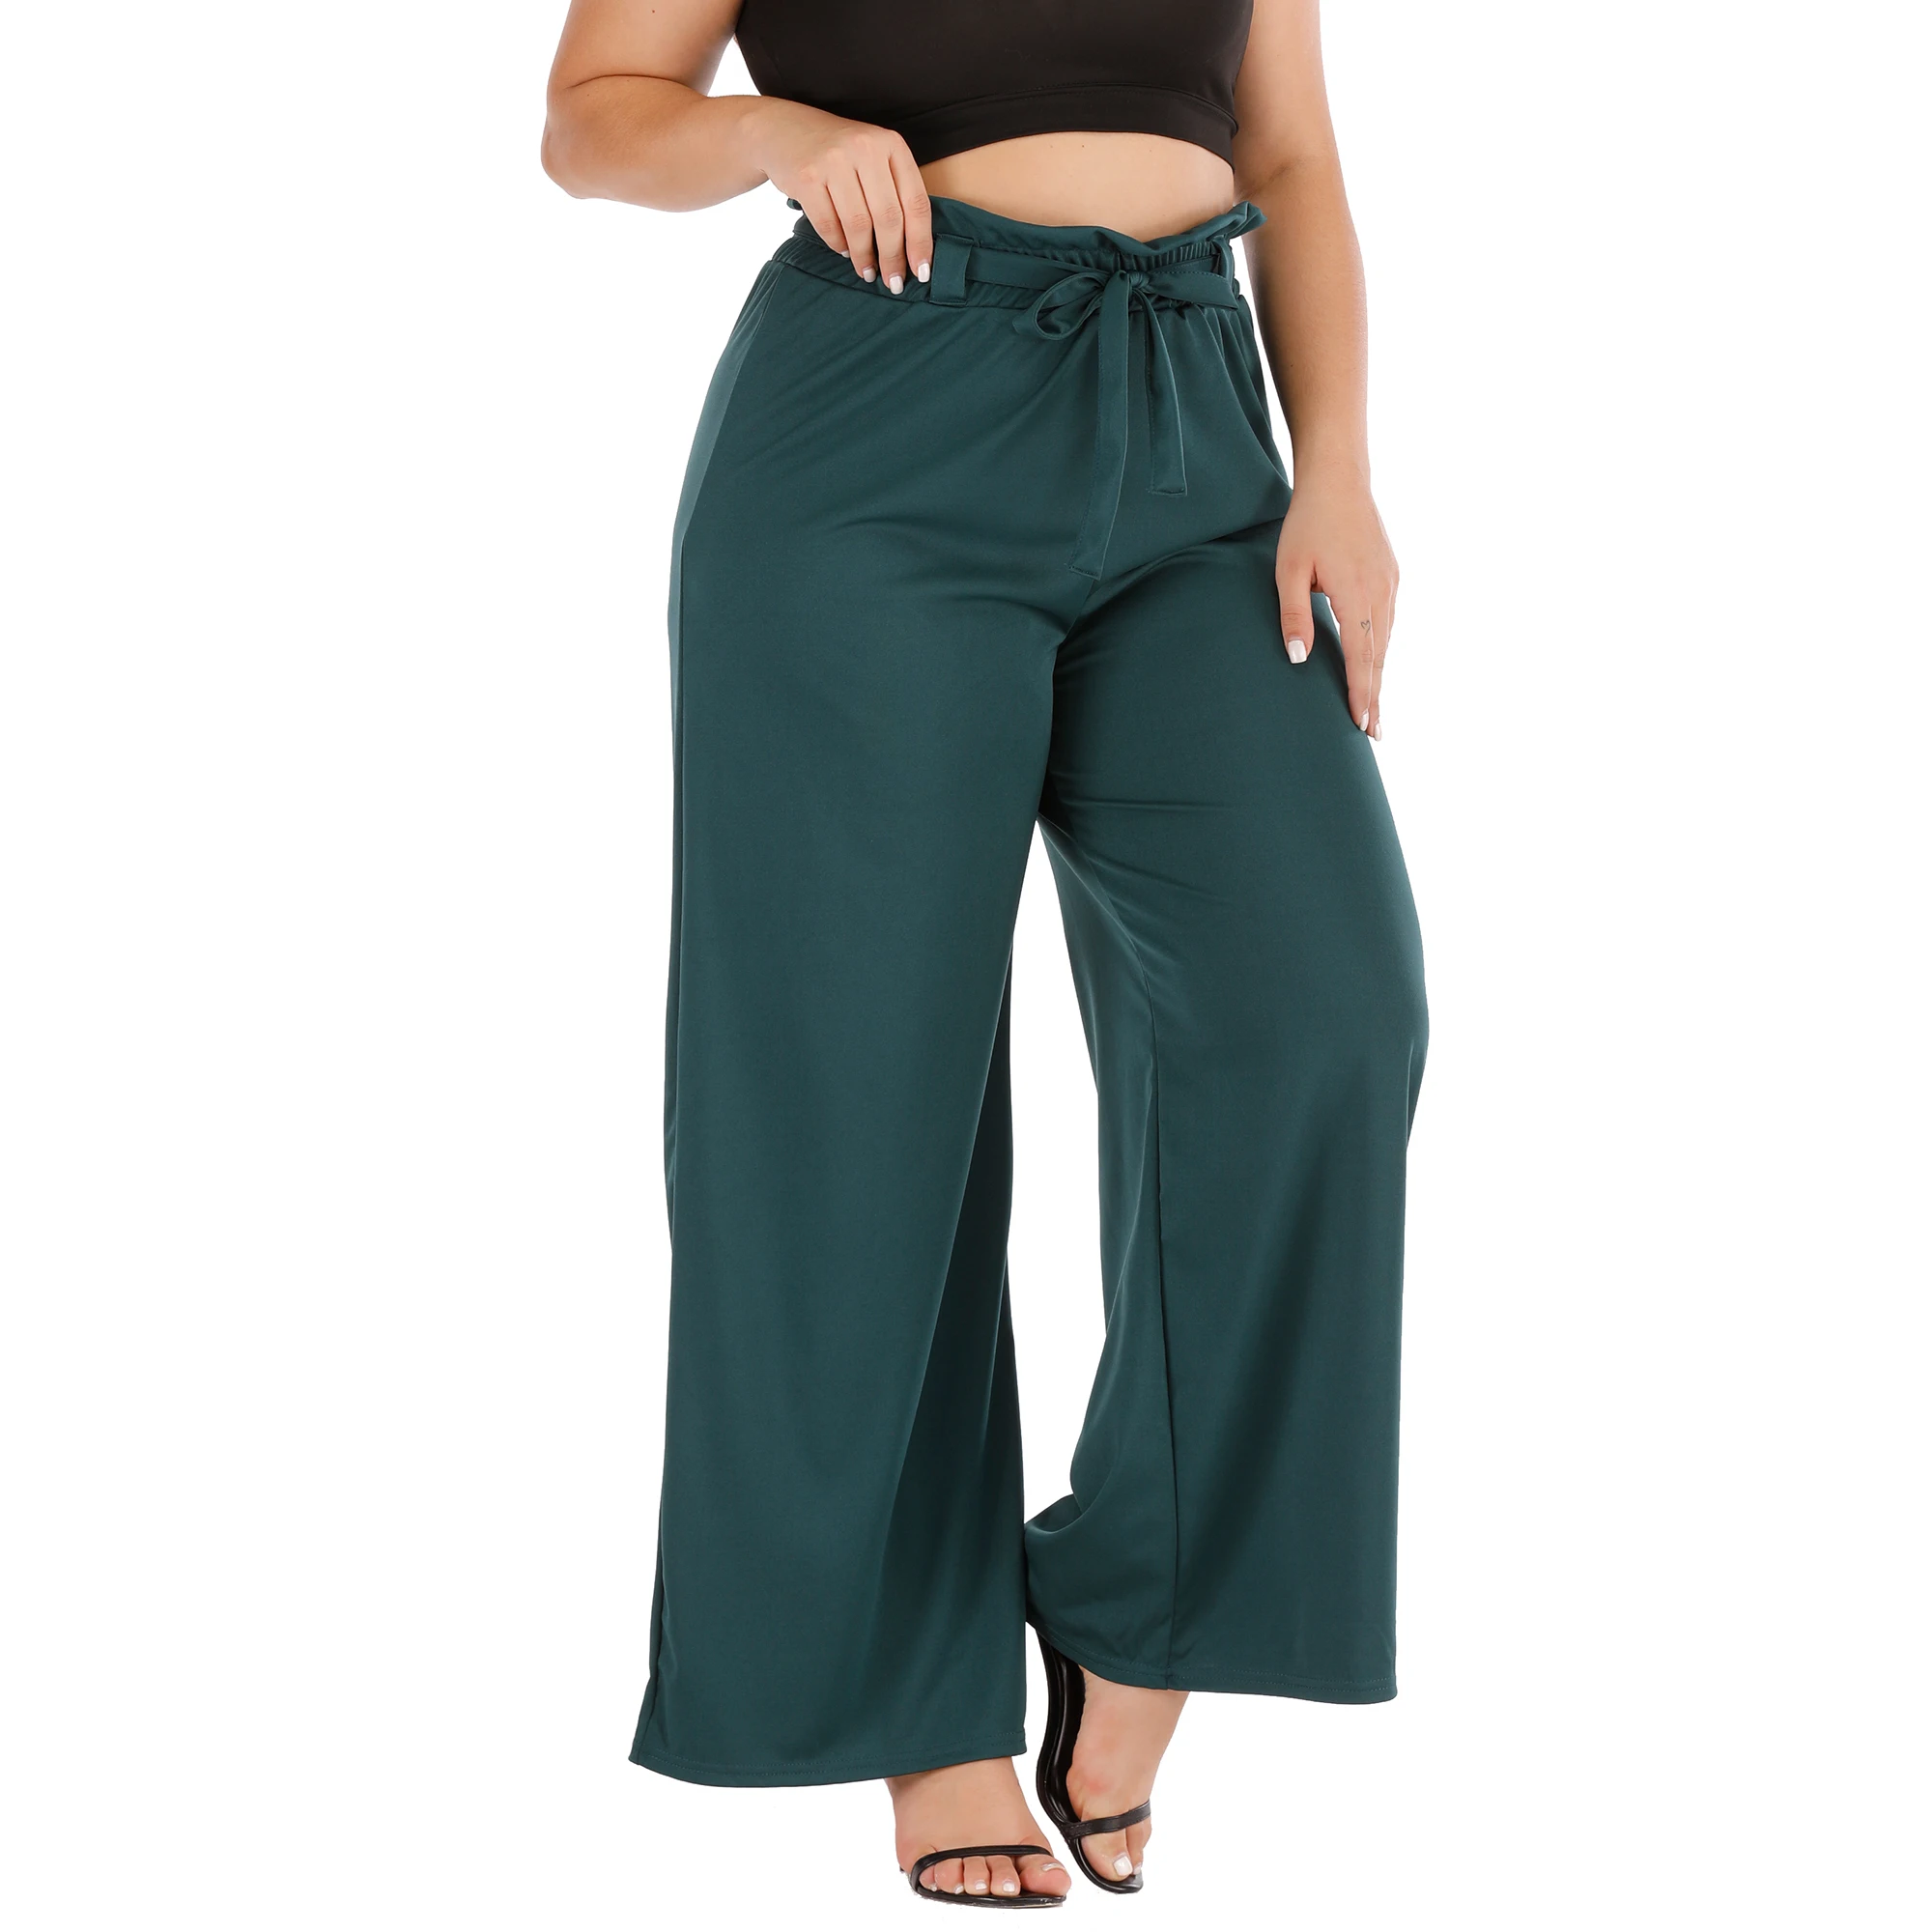 Plus Size Pants for Women Wide Leg Palazzo High Waisted Lounge